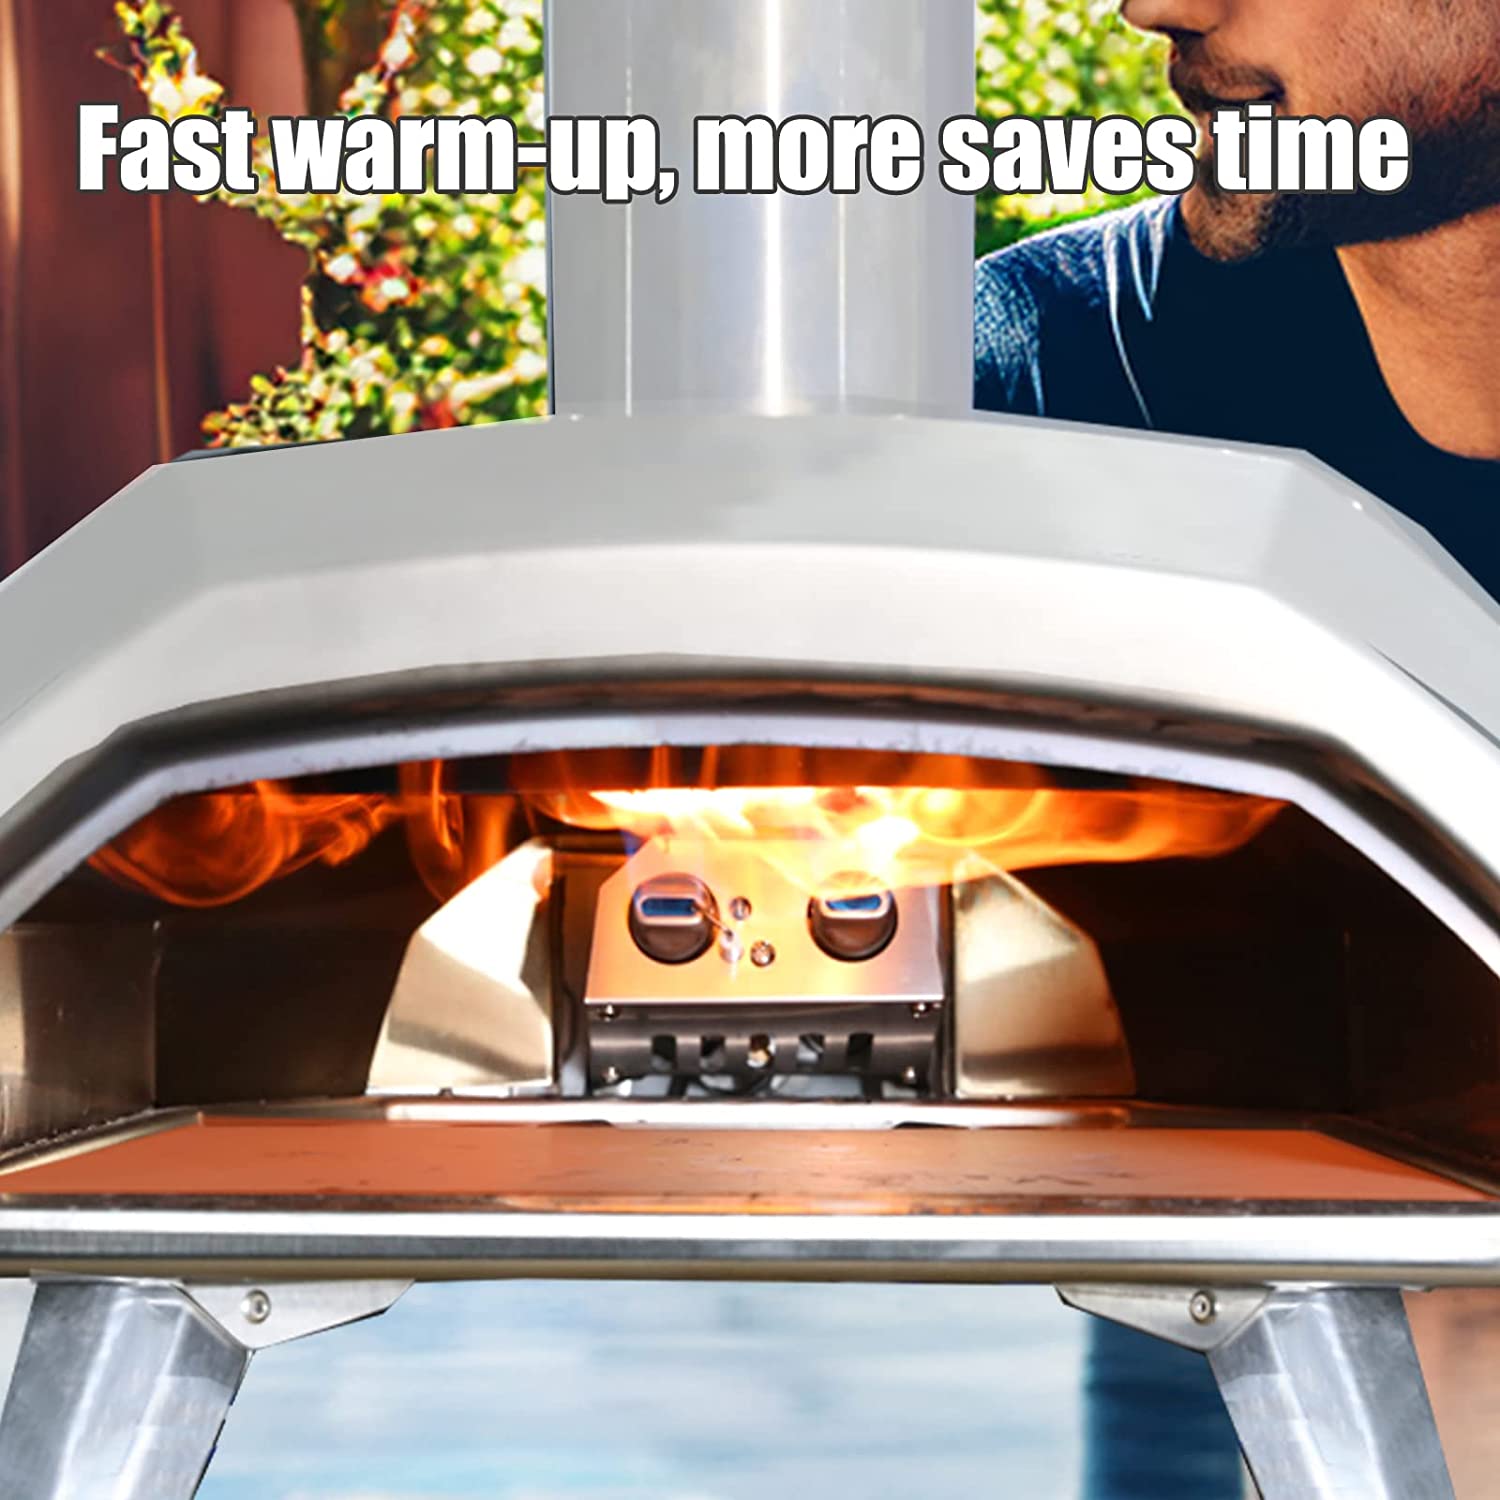 Accessories for professional pizza ovens